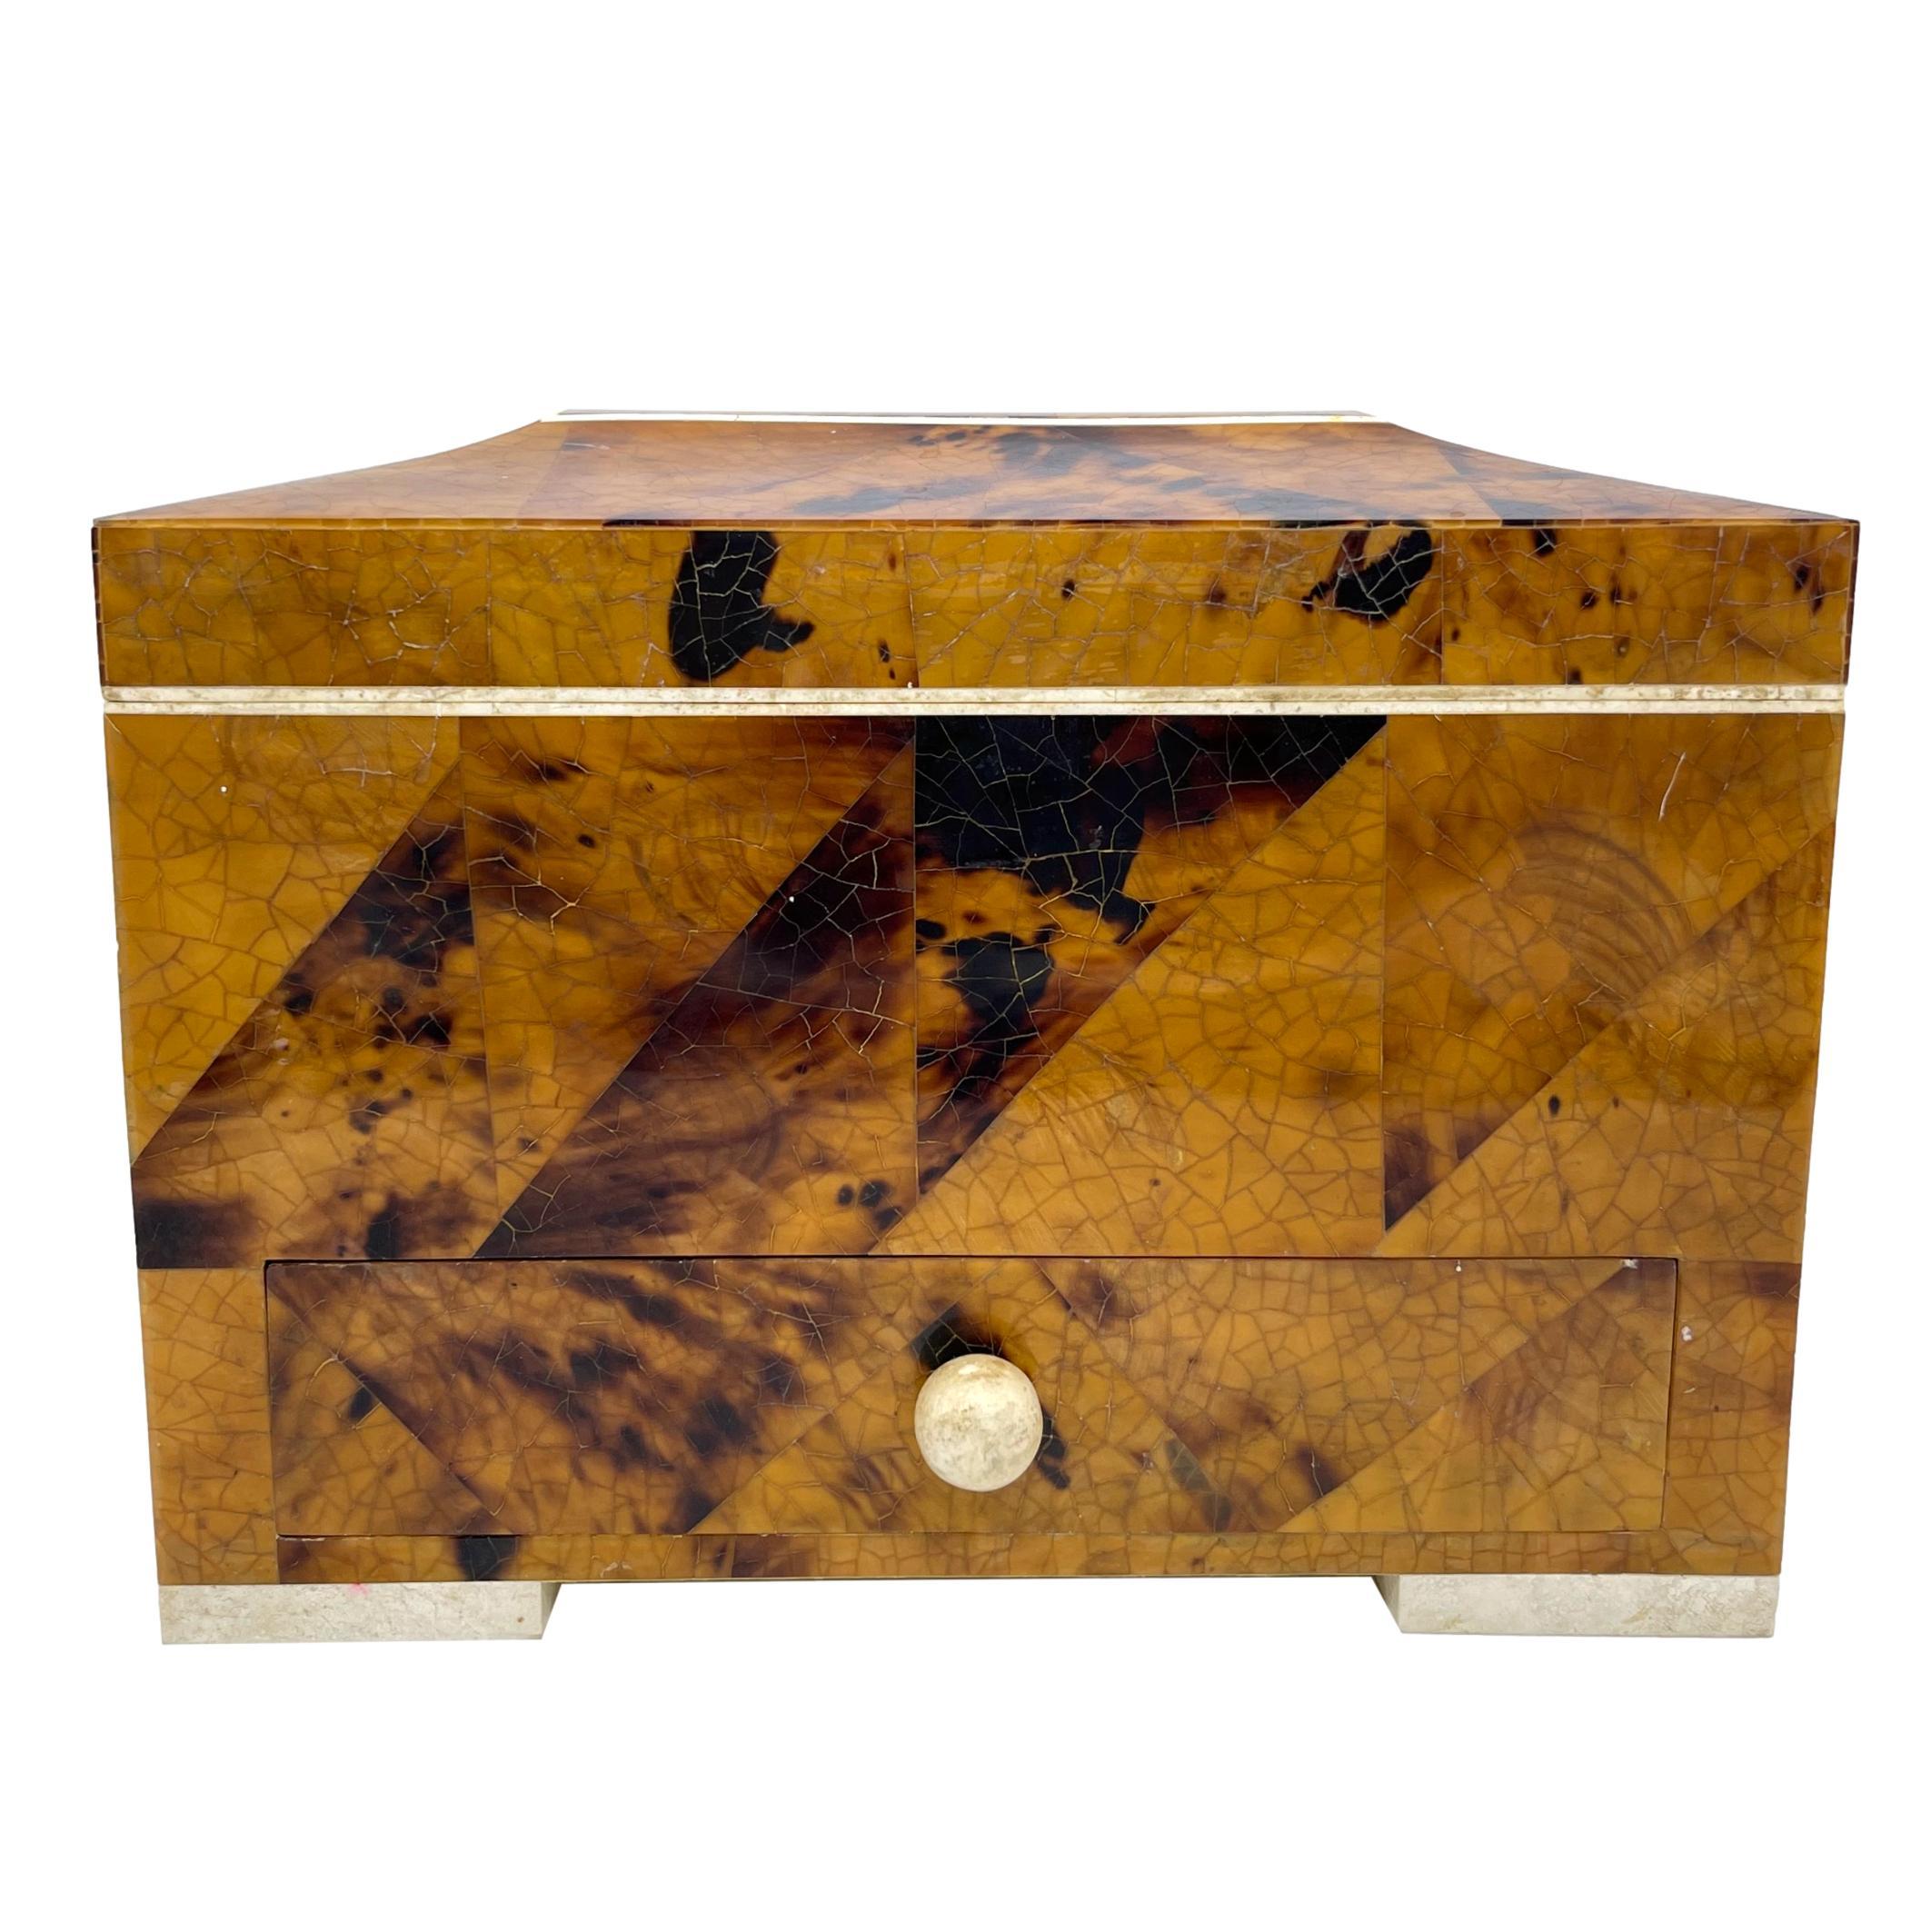 Mid-Century Modern Tessellated Horn & Stone large box, designed by Eugenio Tavola for Oggetti, of saracphagus shape with a hinged lid, the interior lined with original fabric, with a single drawer, the reverse with foil stamp, 'TAVOLA by OGGETTI.'.